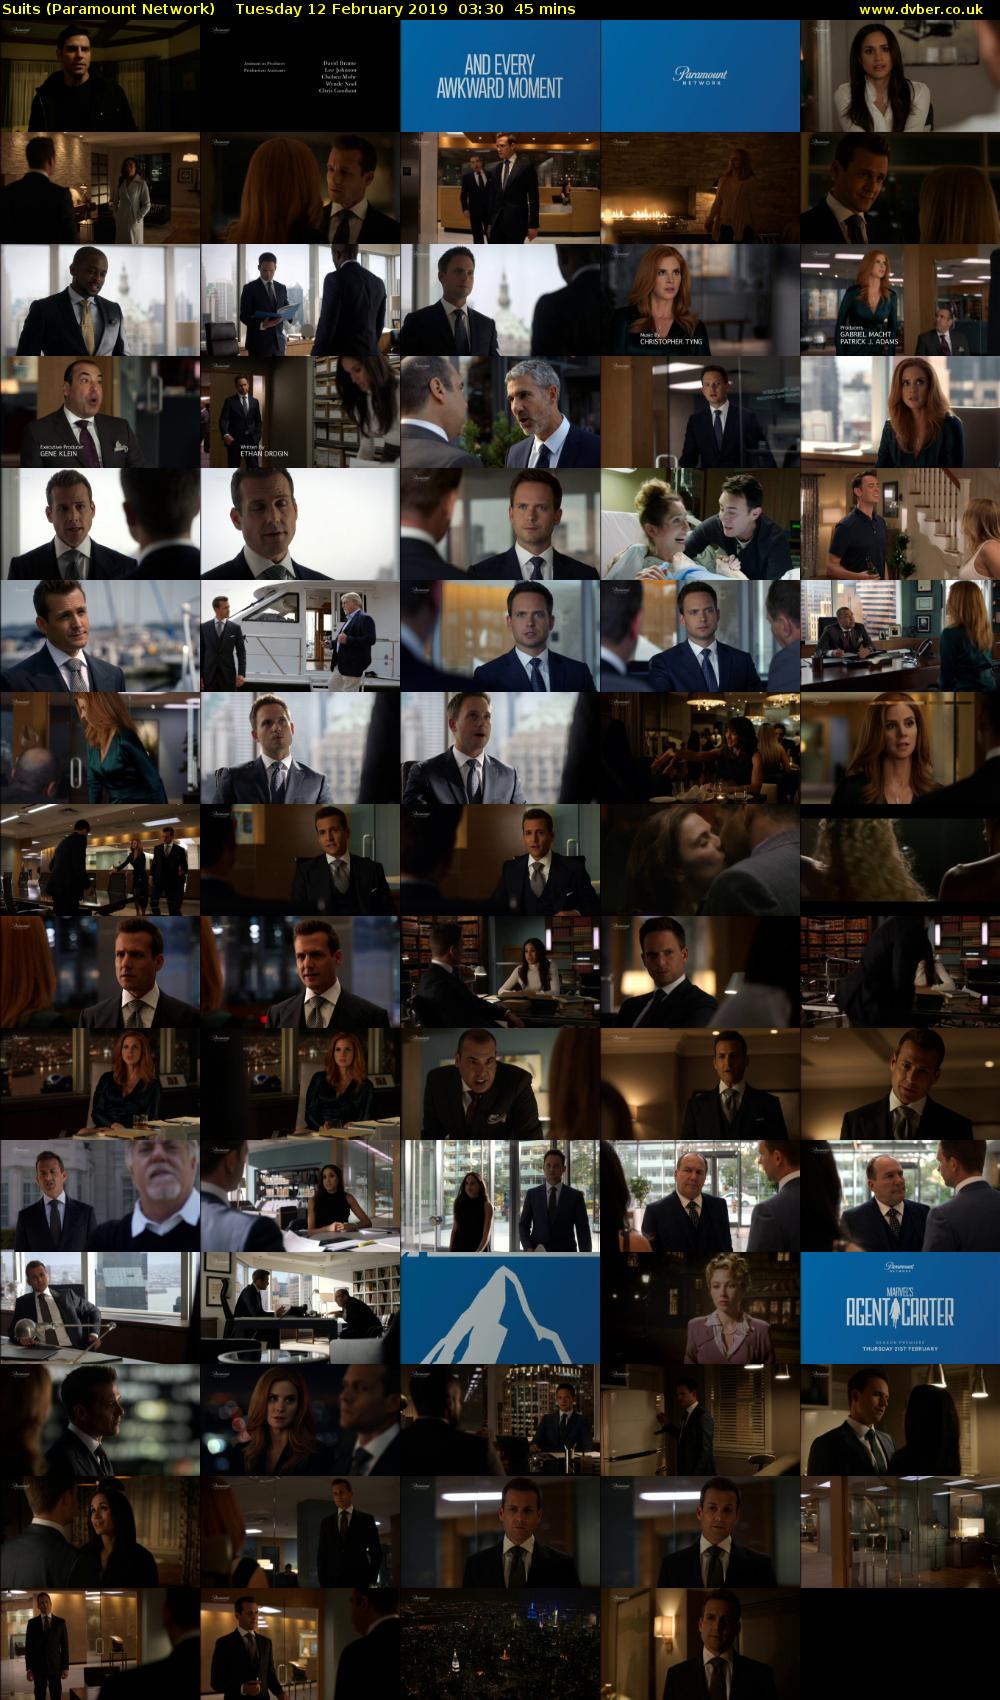 Suits (Paramount Network) Tuesday 12 February 2019 03:30 - 04:15